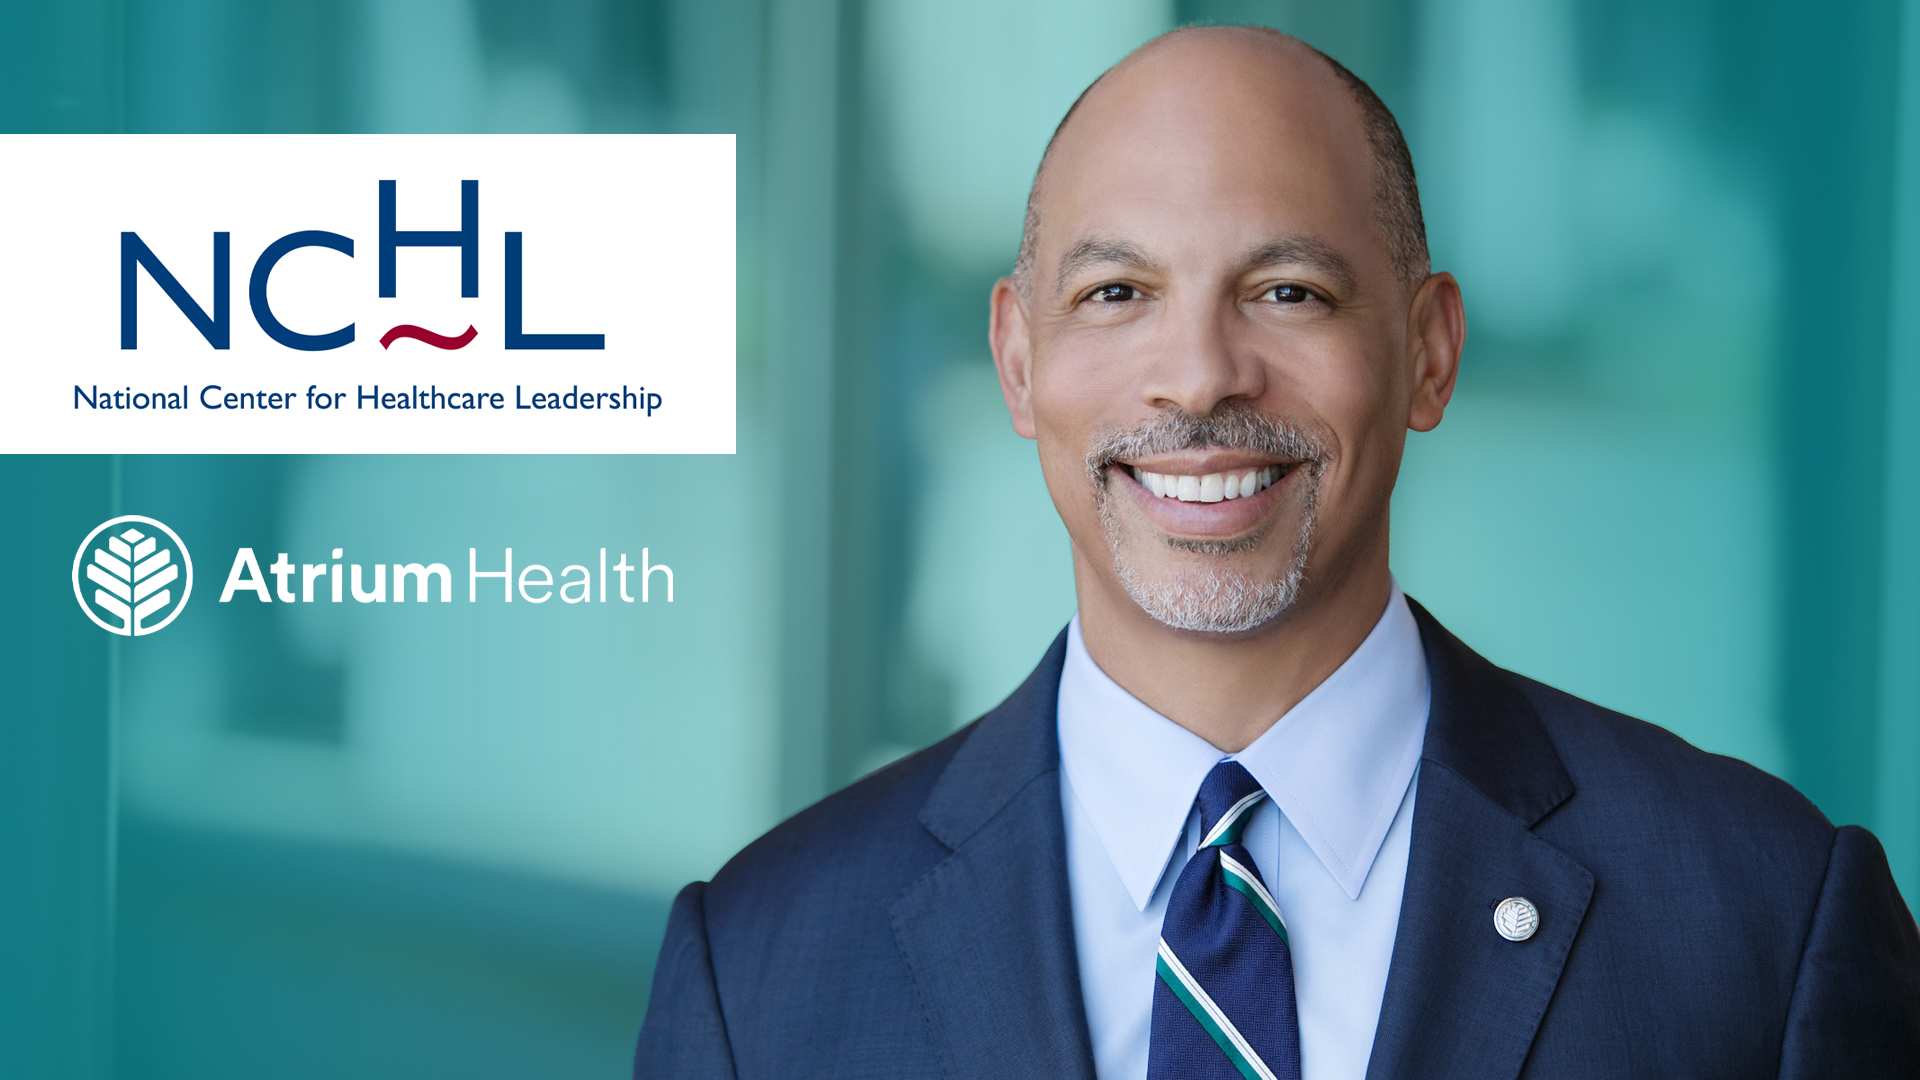 Eugene A. Woods, president and chief executive officer of Atrium Health, has been named the 2022 Gail L. Warden Leadership Excellence award recipient.